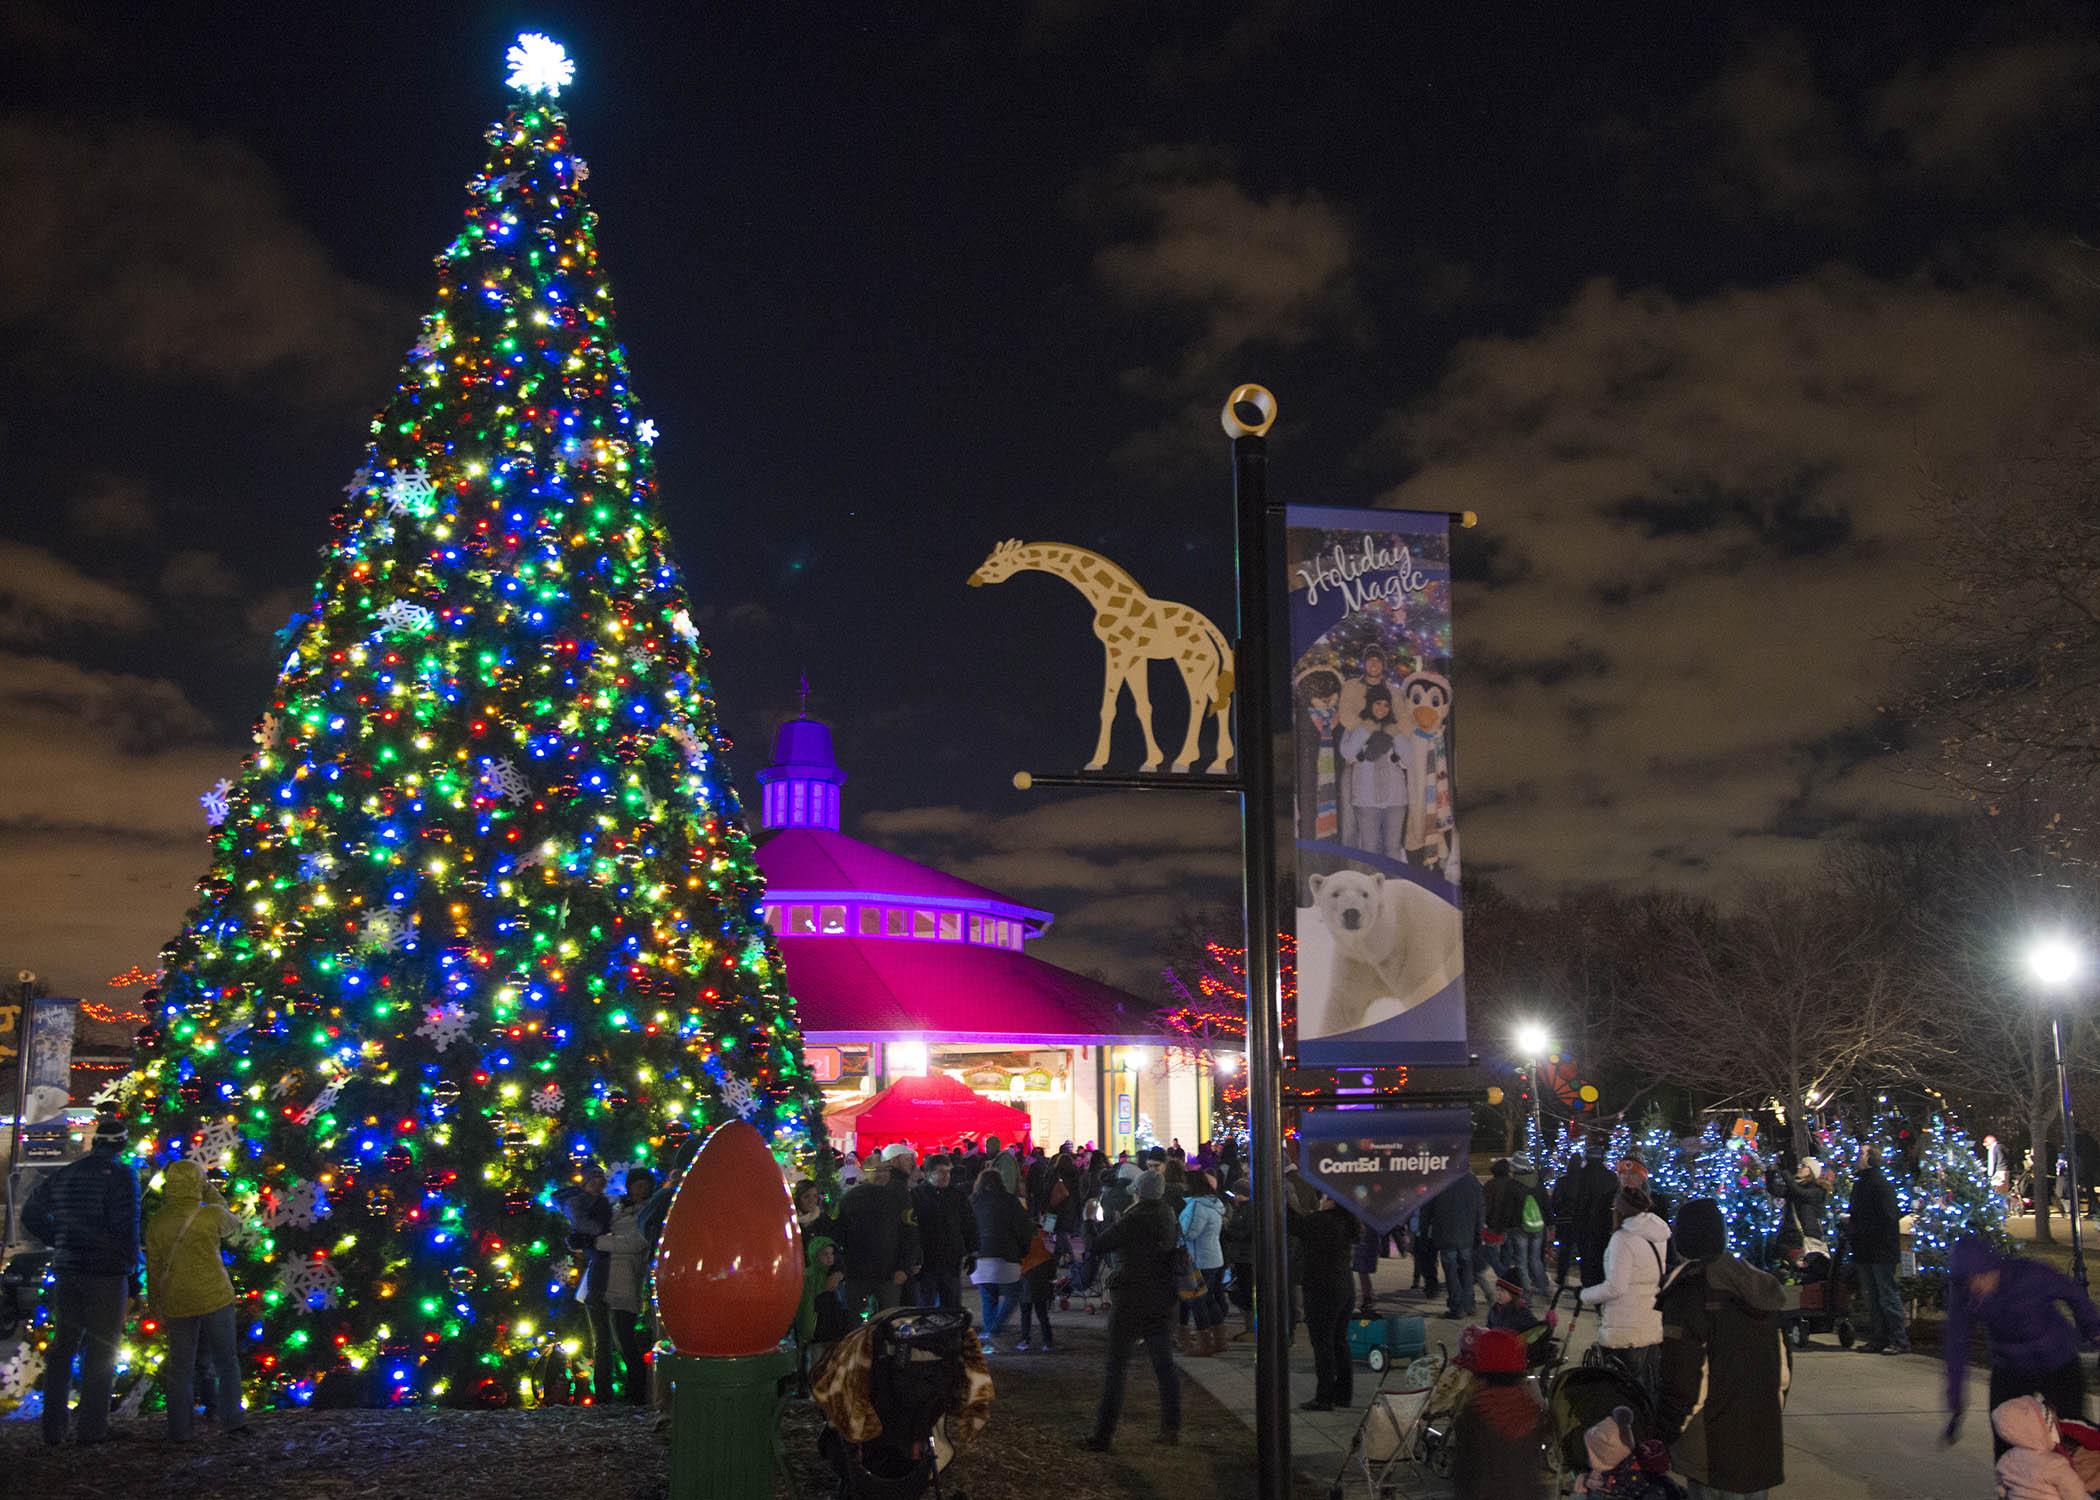 The 41-foot-tall “talking” tree engages guests conversation at Brookfield Zoo’s Holiday Magic. (Courtesy of Chicago Zoological Society)